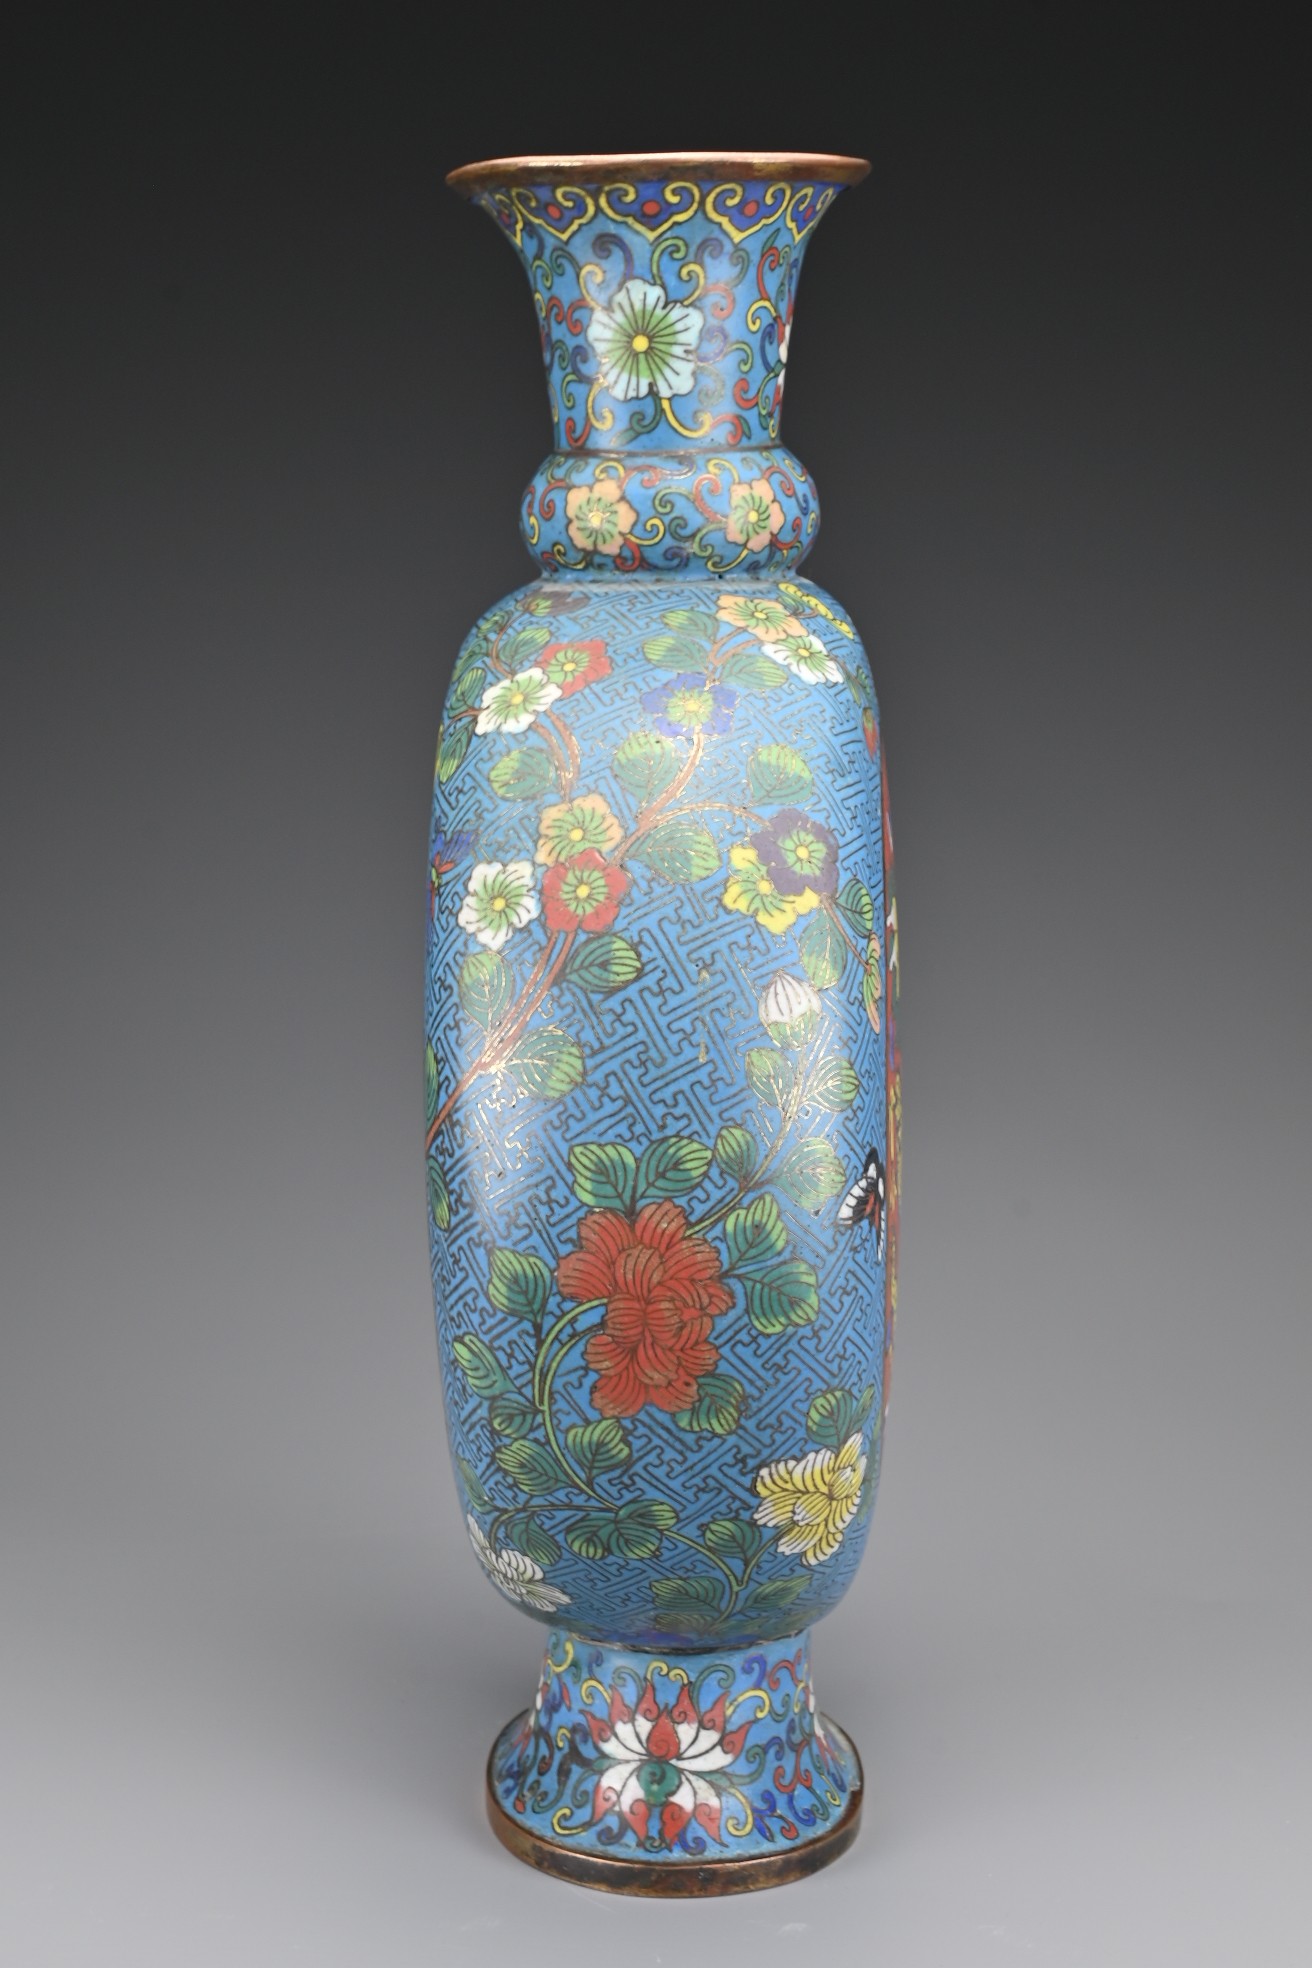 A LARGE CHINESE 19TH CENTURY CLOISONNÉ ENAMEL MOONFLASK, QING DYNASTY. Each face depicting two - Image 2 of 5